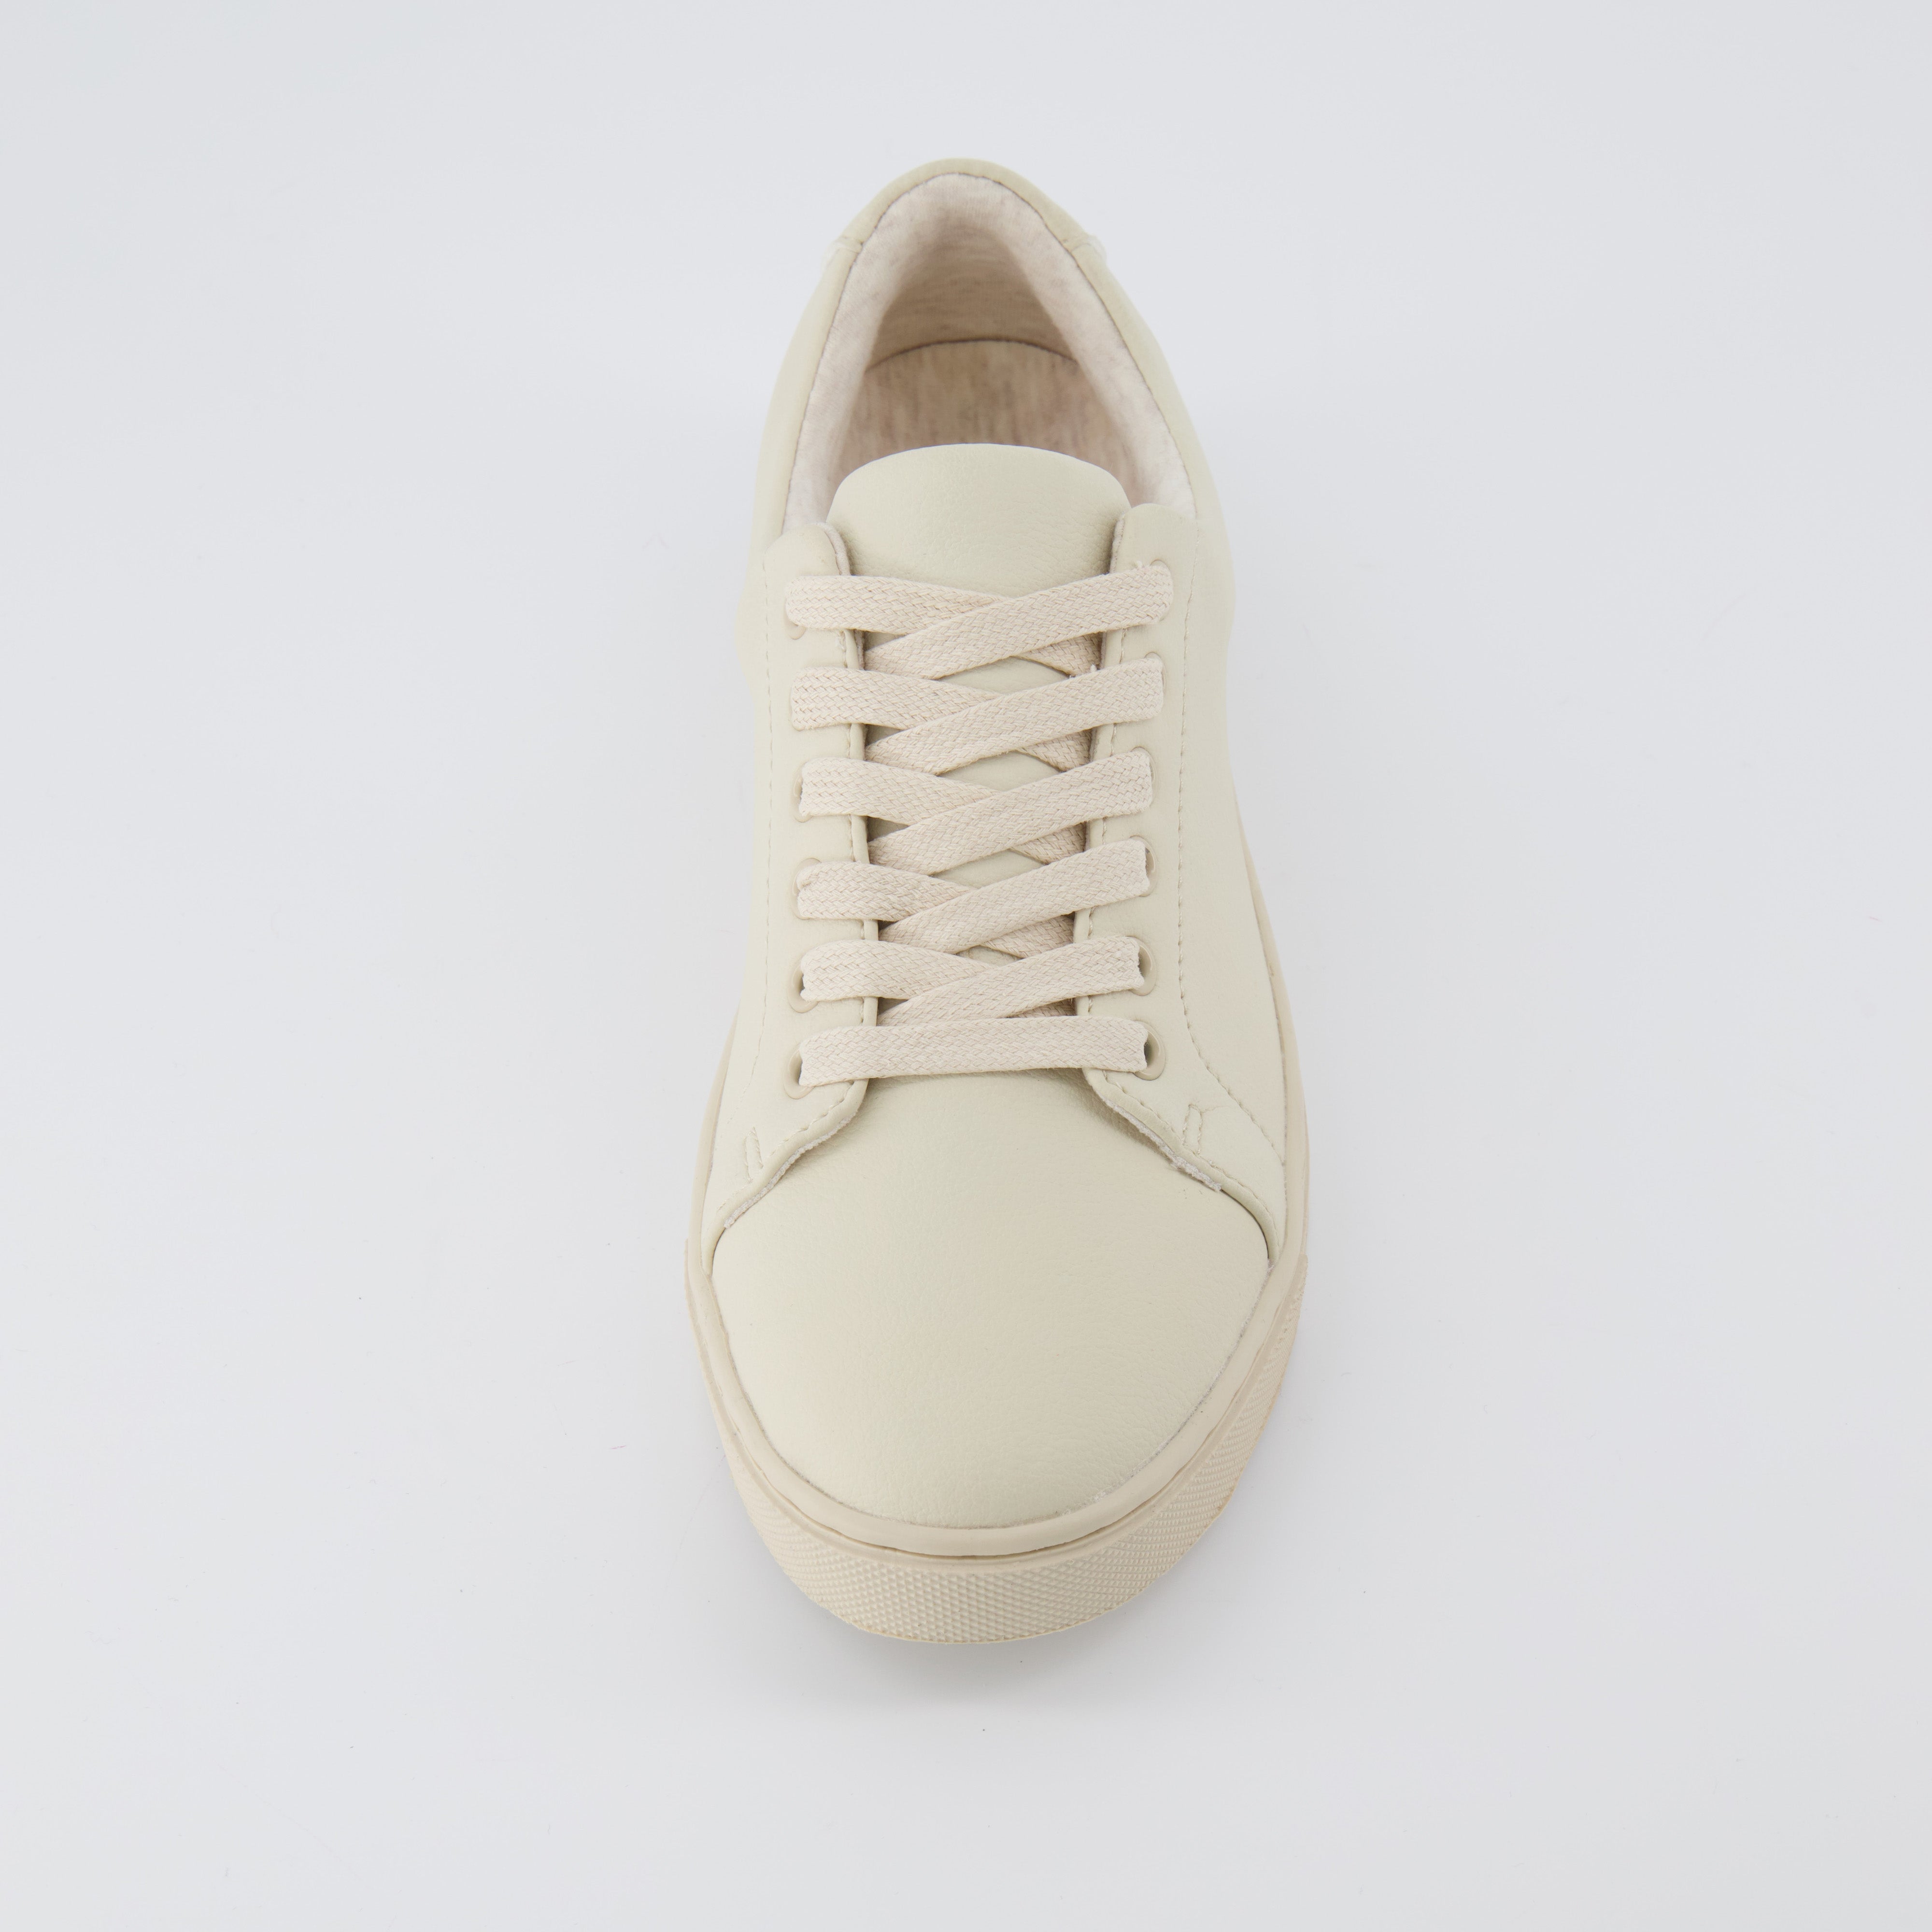 Hashtag Lace-up Sneaker